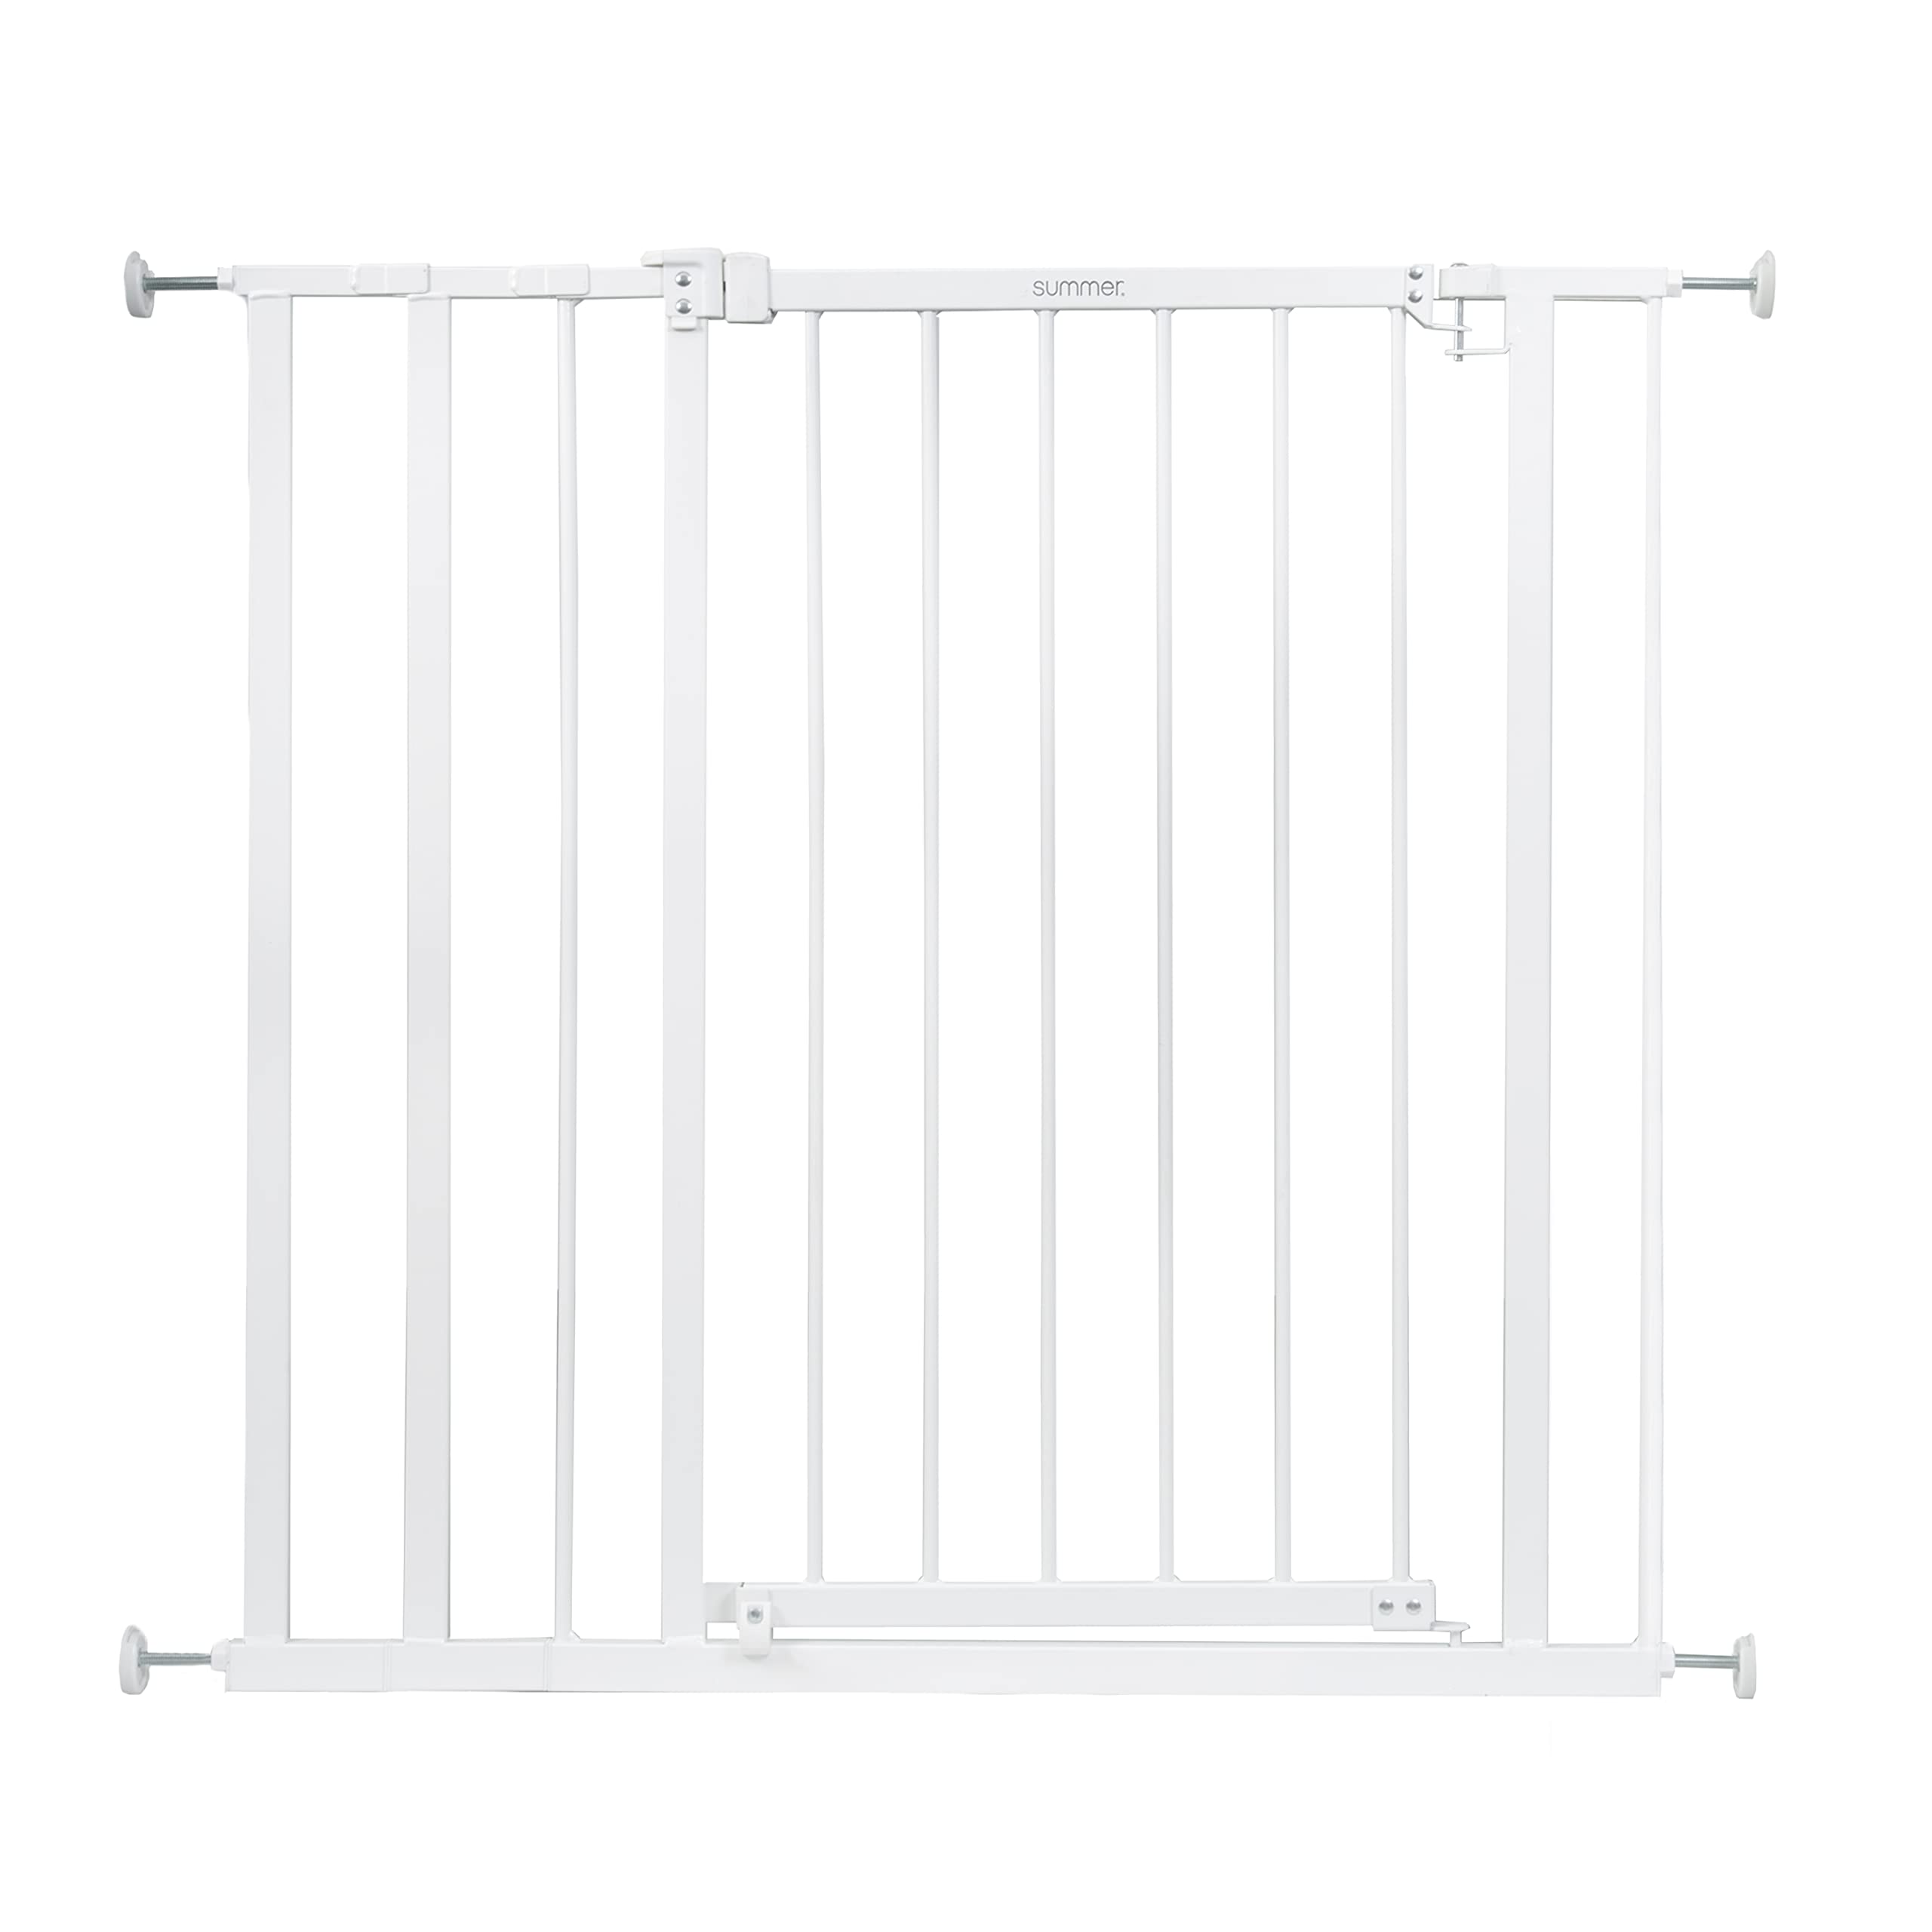 Summer Infant Summer Everywhere Extra Tall & Extra Wide Walk-Thru Safety Baby gate, Fits Openings 2875-3975 Wide, White Metal, for Doorways an